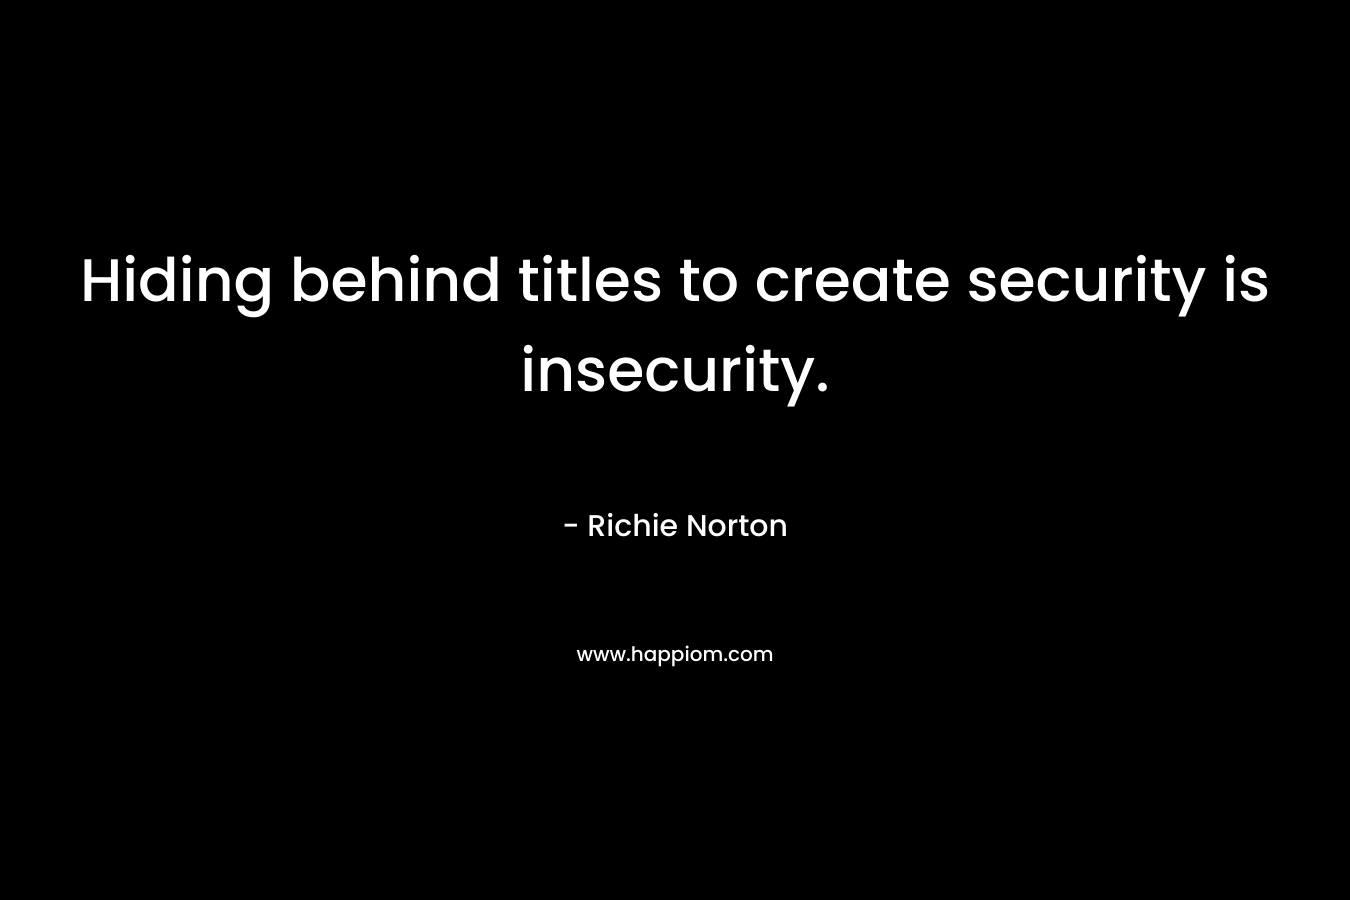 Hiding behind titles to create security is insecurity.